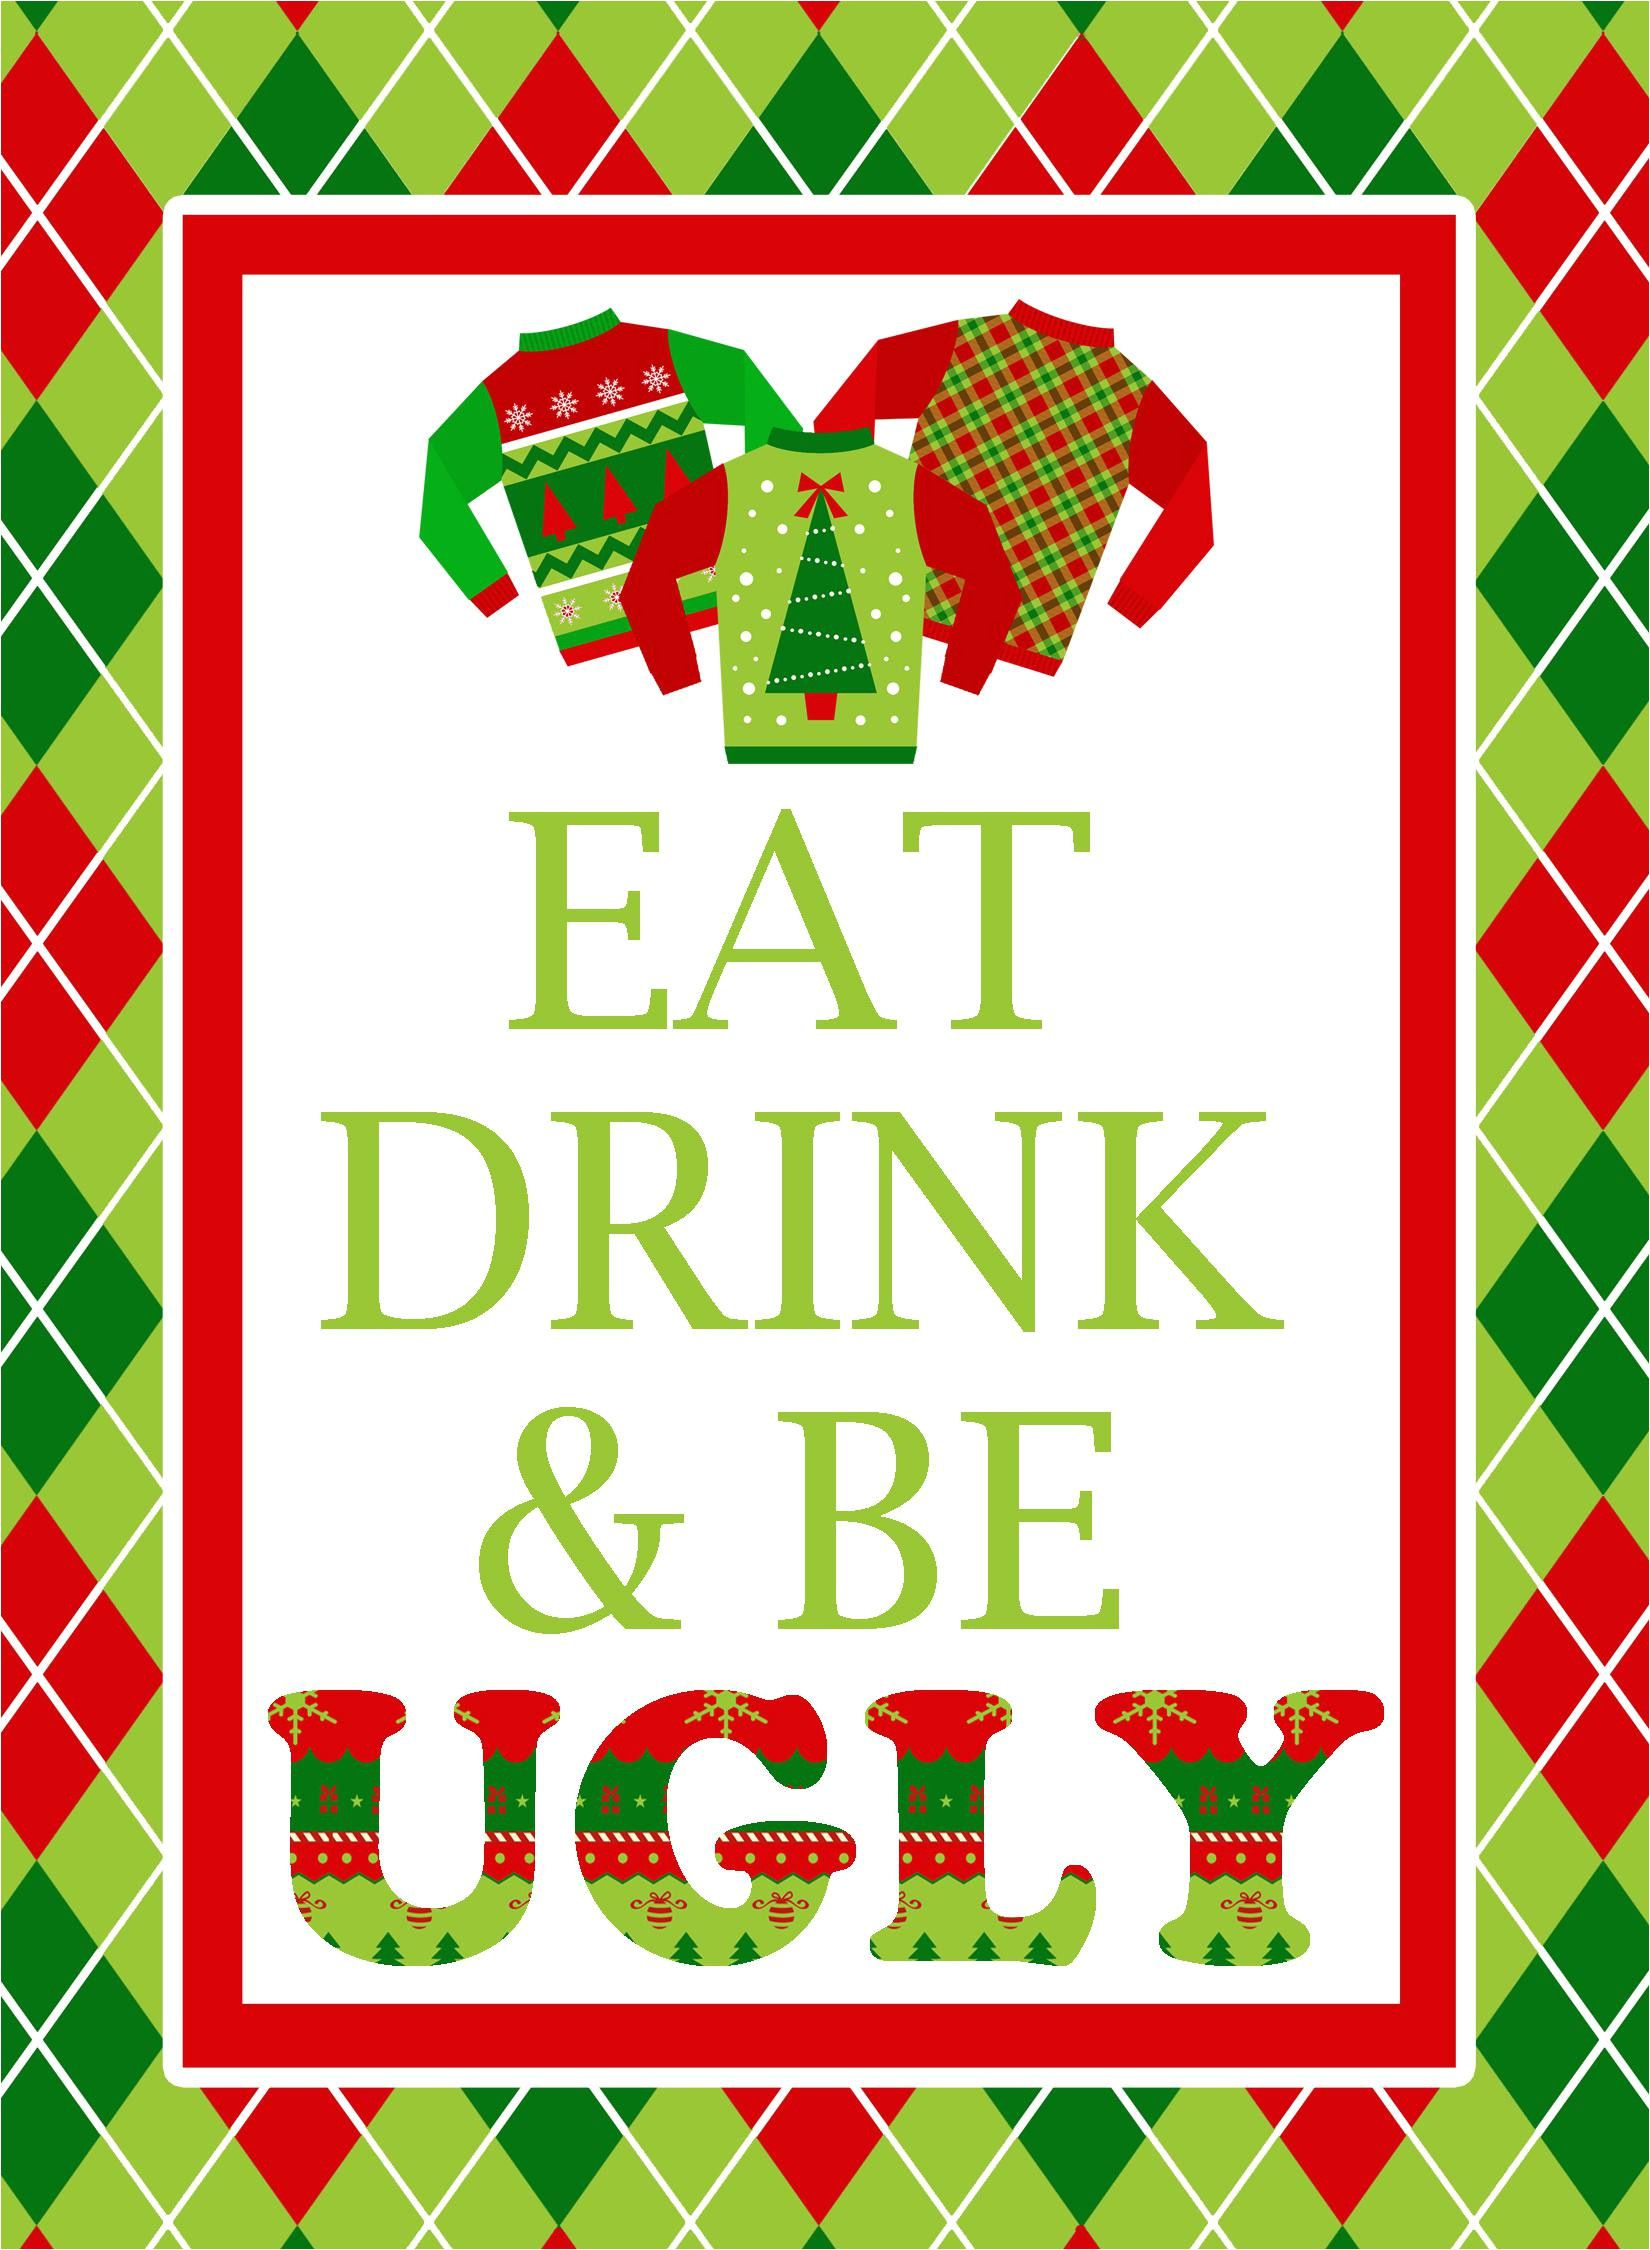 Ugly Sweater Party Invitation Template Free Ugly Sweater Party Invitation Template Free Word